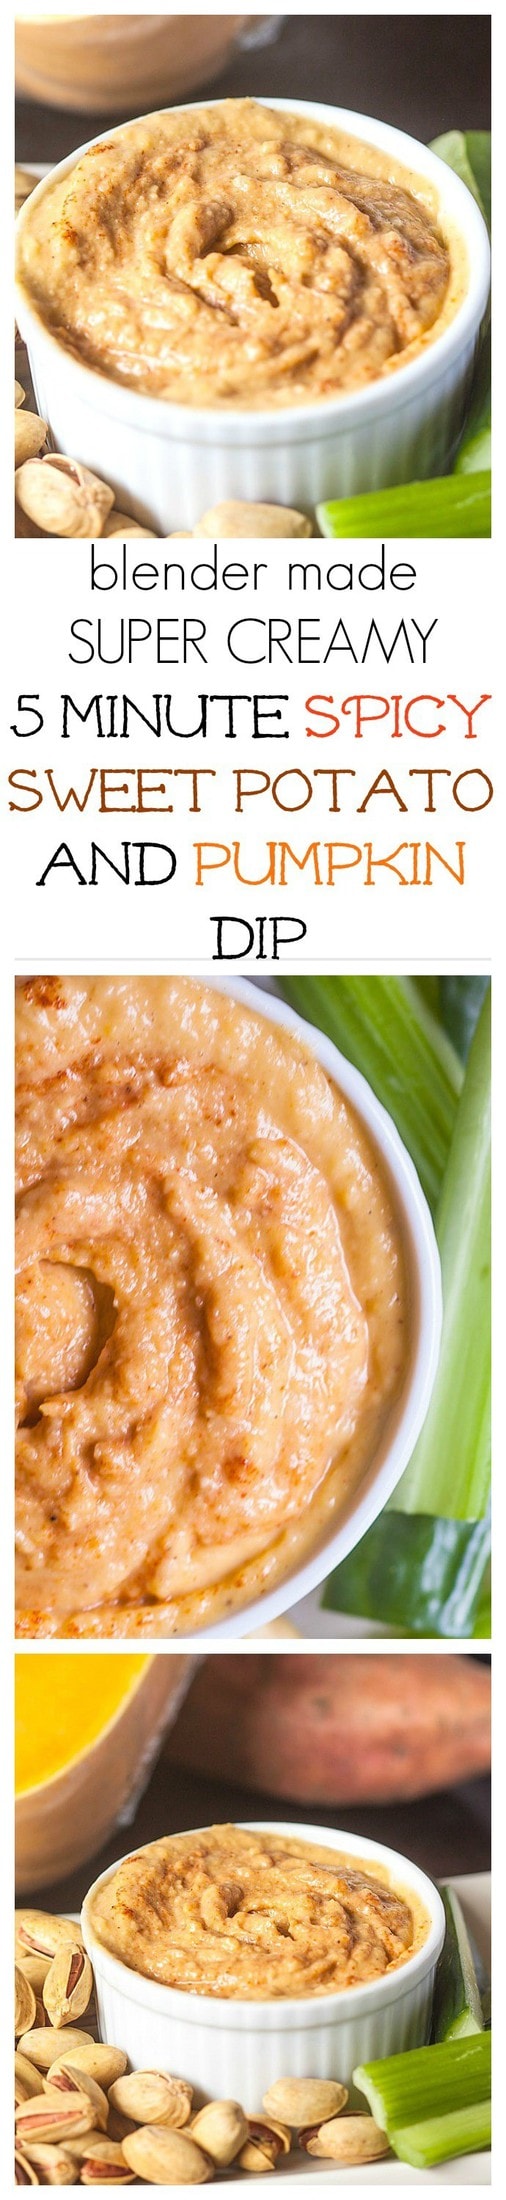 Spicy Sweet Potato and Pumpkin Dip- A quick and easy paleo friendly dip which requires no food processor! A combination of spices and mix of sweet potato and pumpkin for a delicious sweet, salty and spicy combination @thebigmansworld - thebigmansworld.com